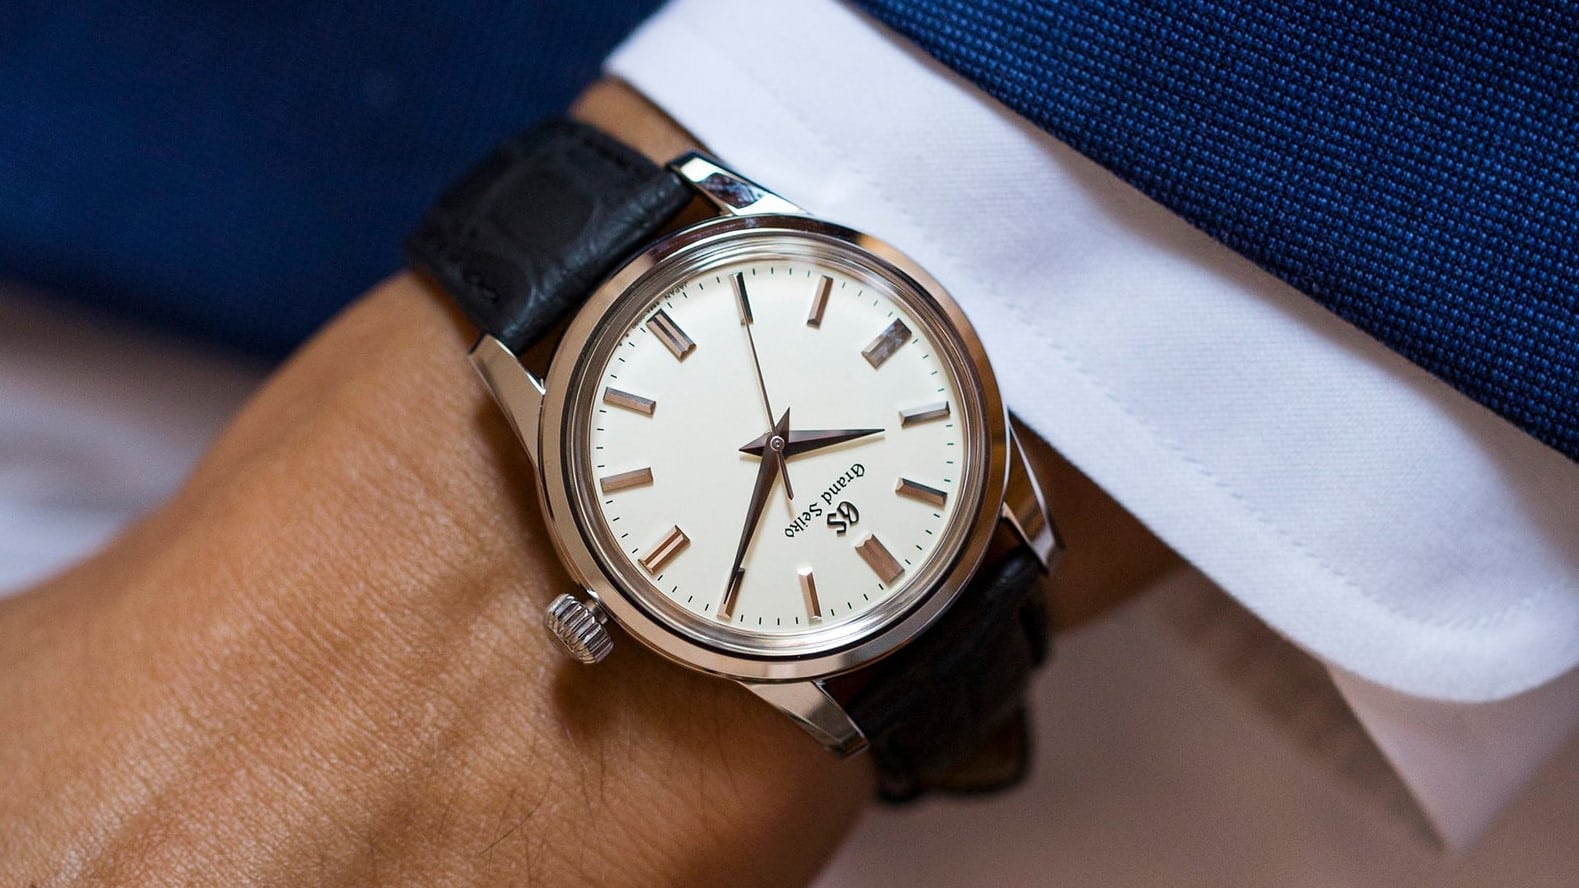 Pre-Owned Picks: Six Dress Watches That Are C'est Magnifique And Under  $5,000.